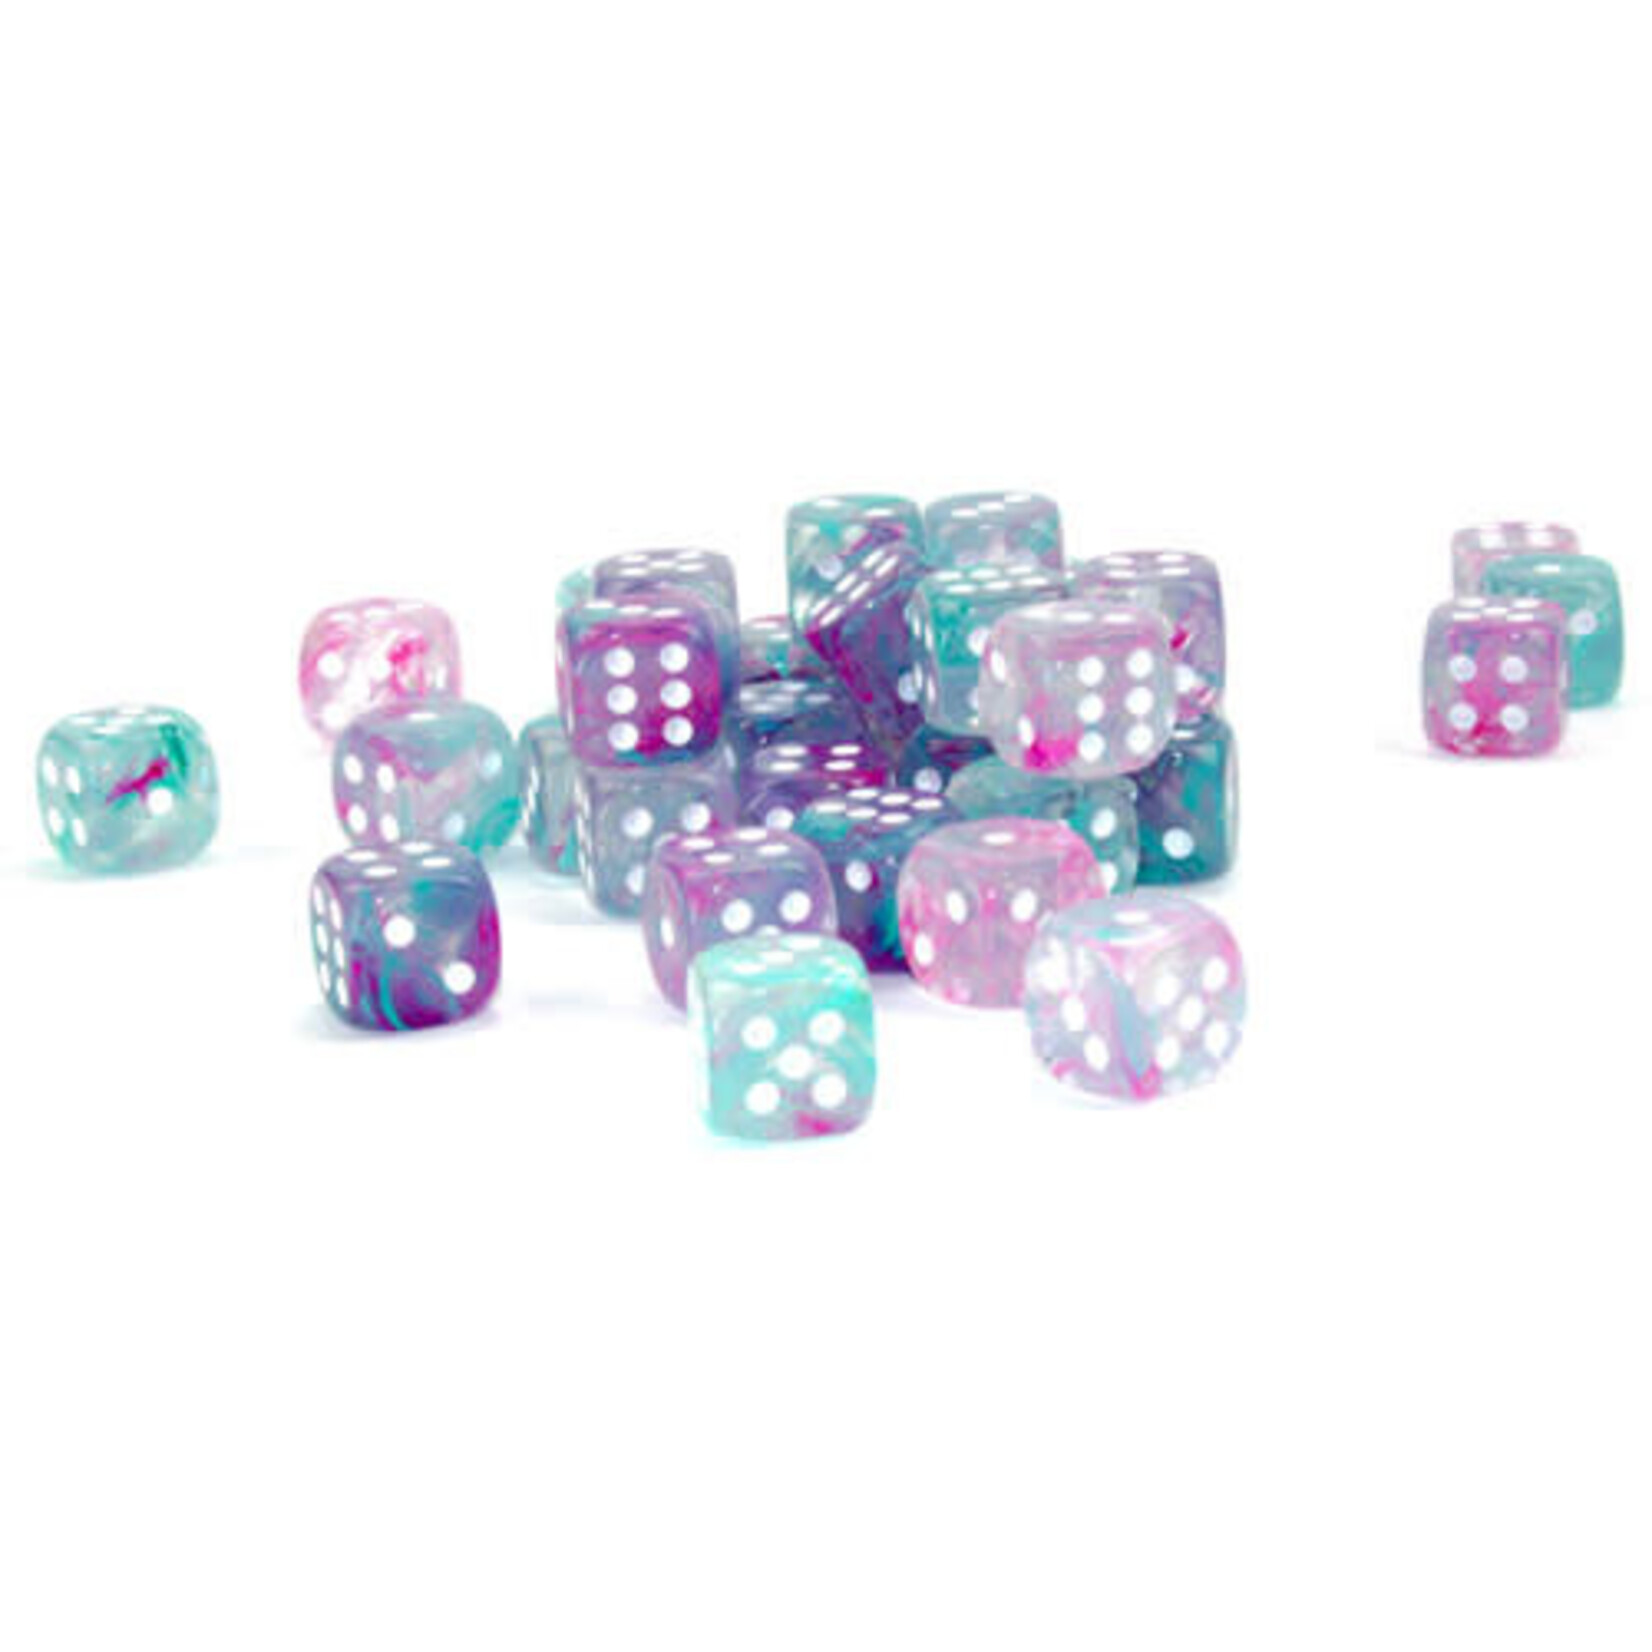 Chessex d6Cube 12mm Luminary NB Wisteria wh (36)